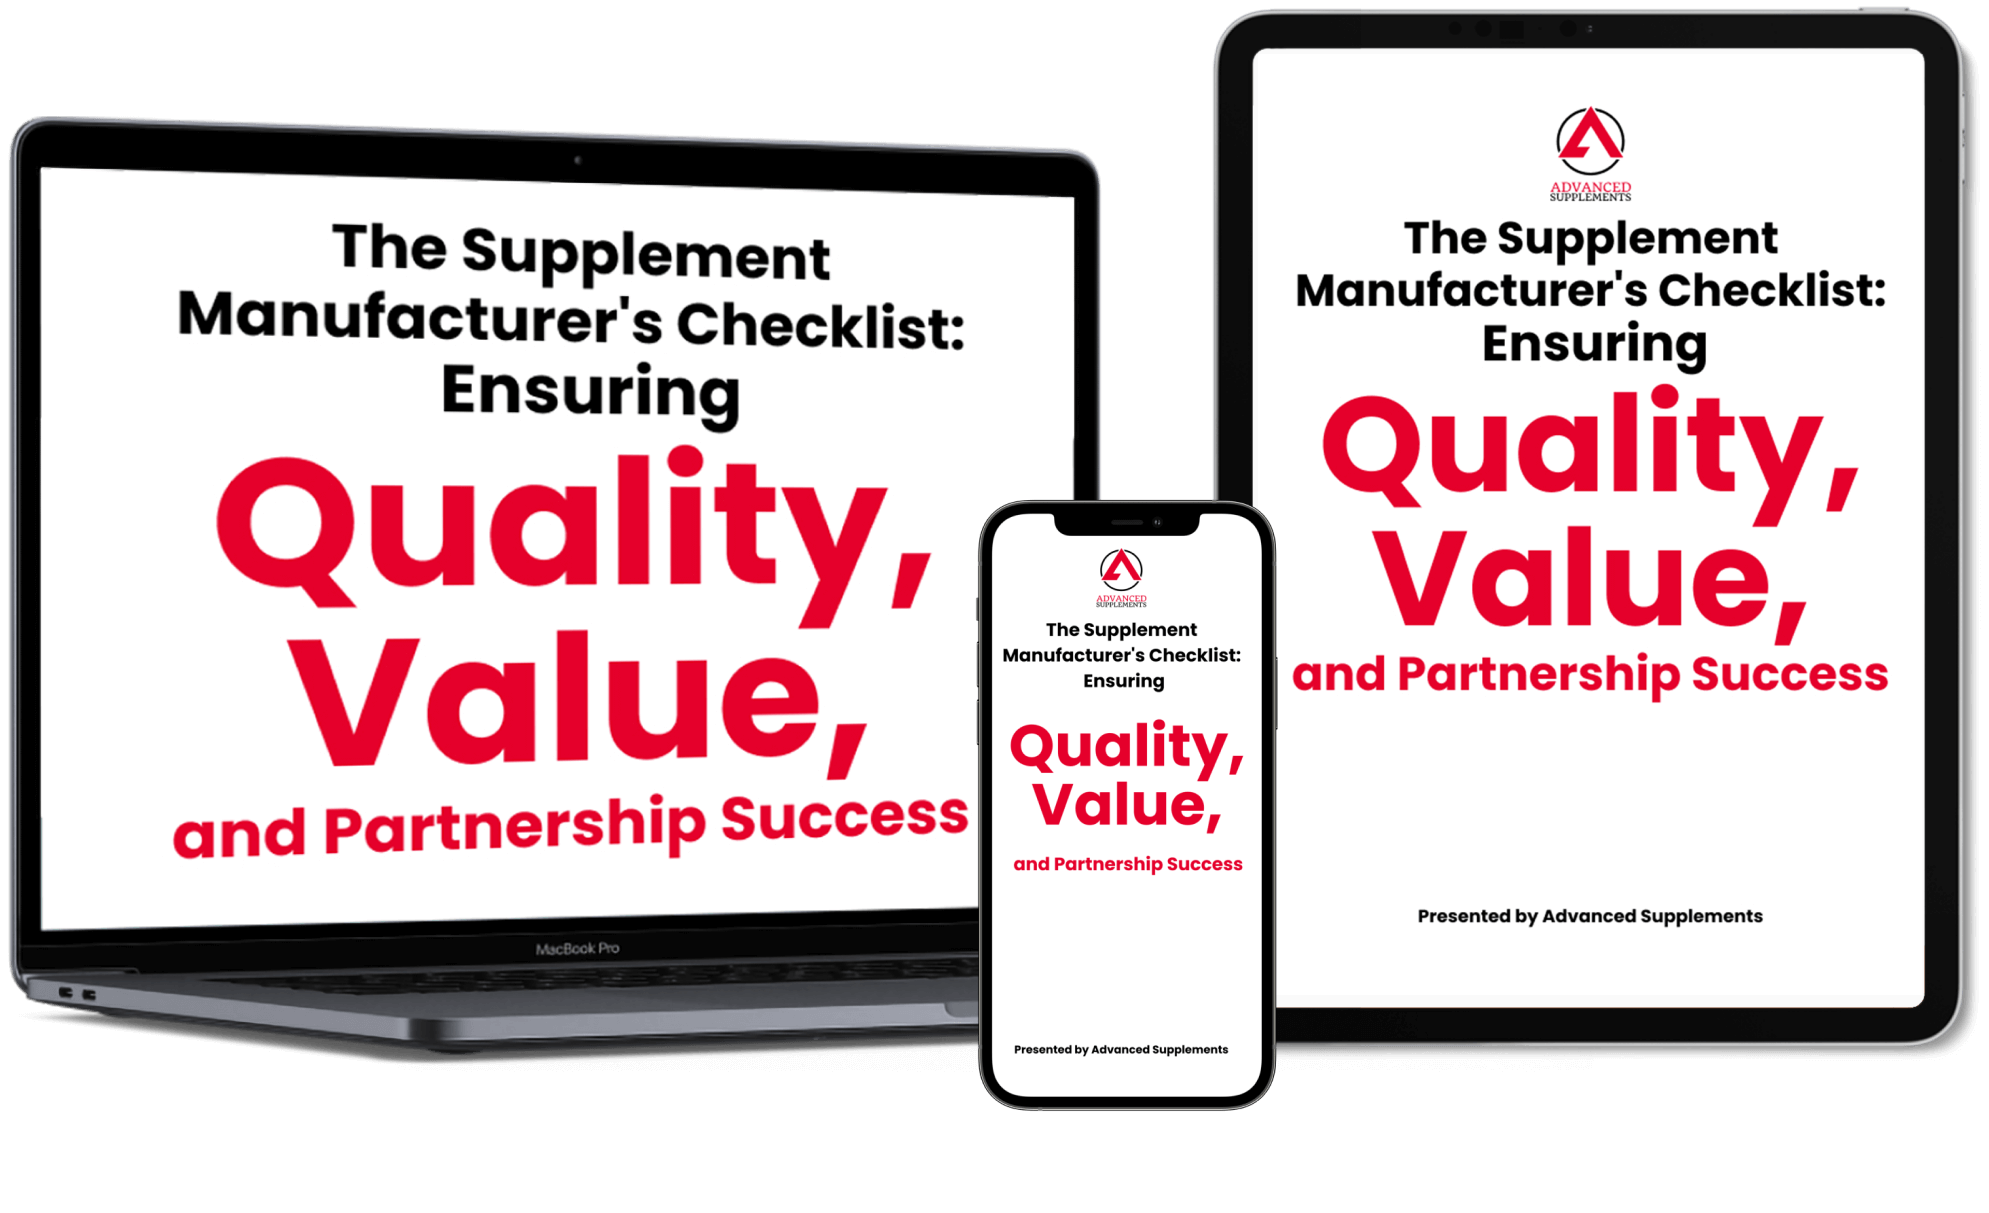 The Supplement Manufacturer's Checklist Ensuring Quality, Value, and Partnership Success